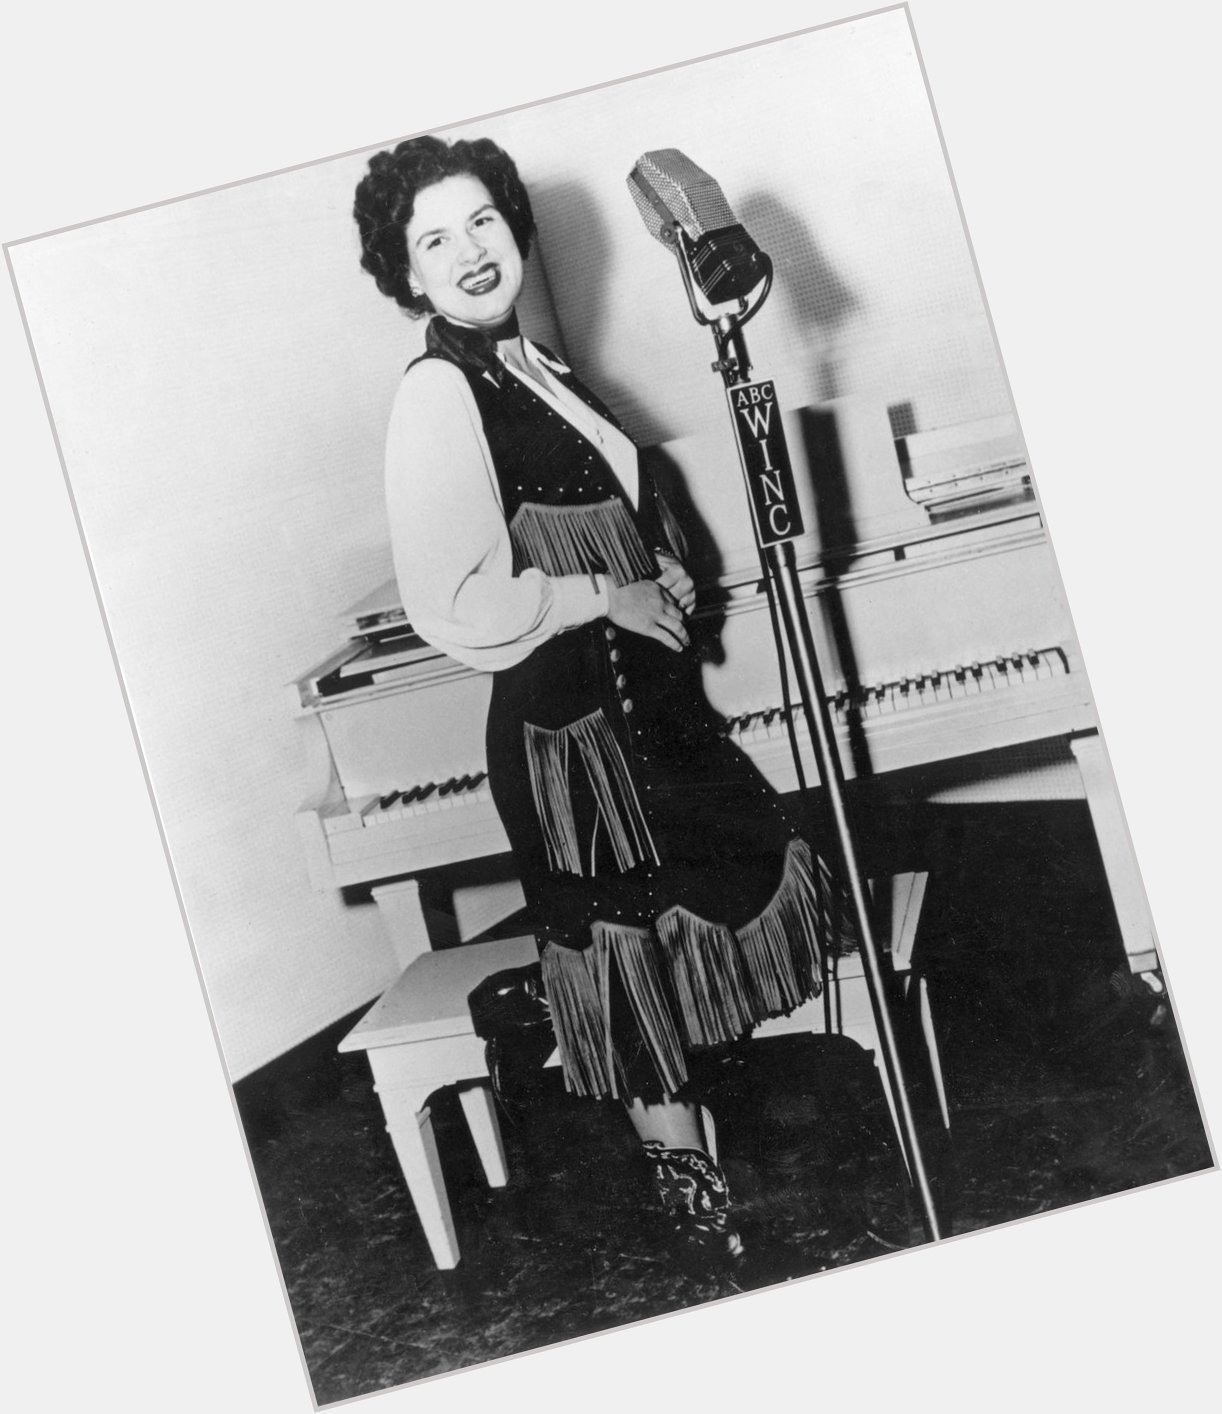 Happy Birthday to Patsy Cline, who would have turned 85 today! 